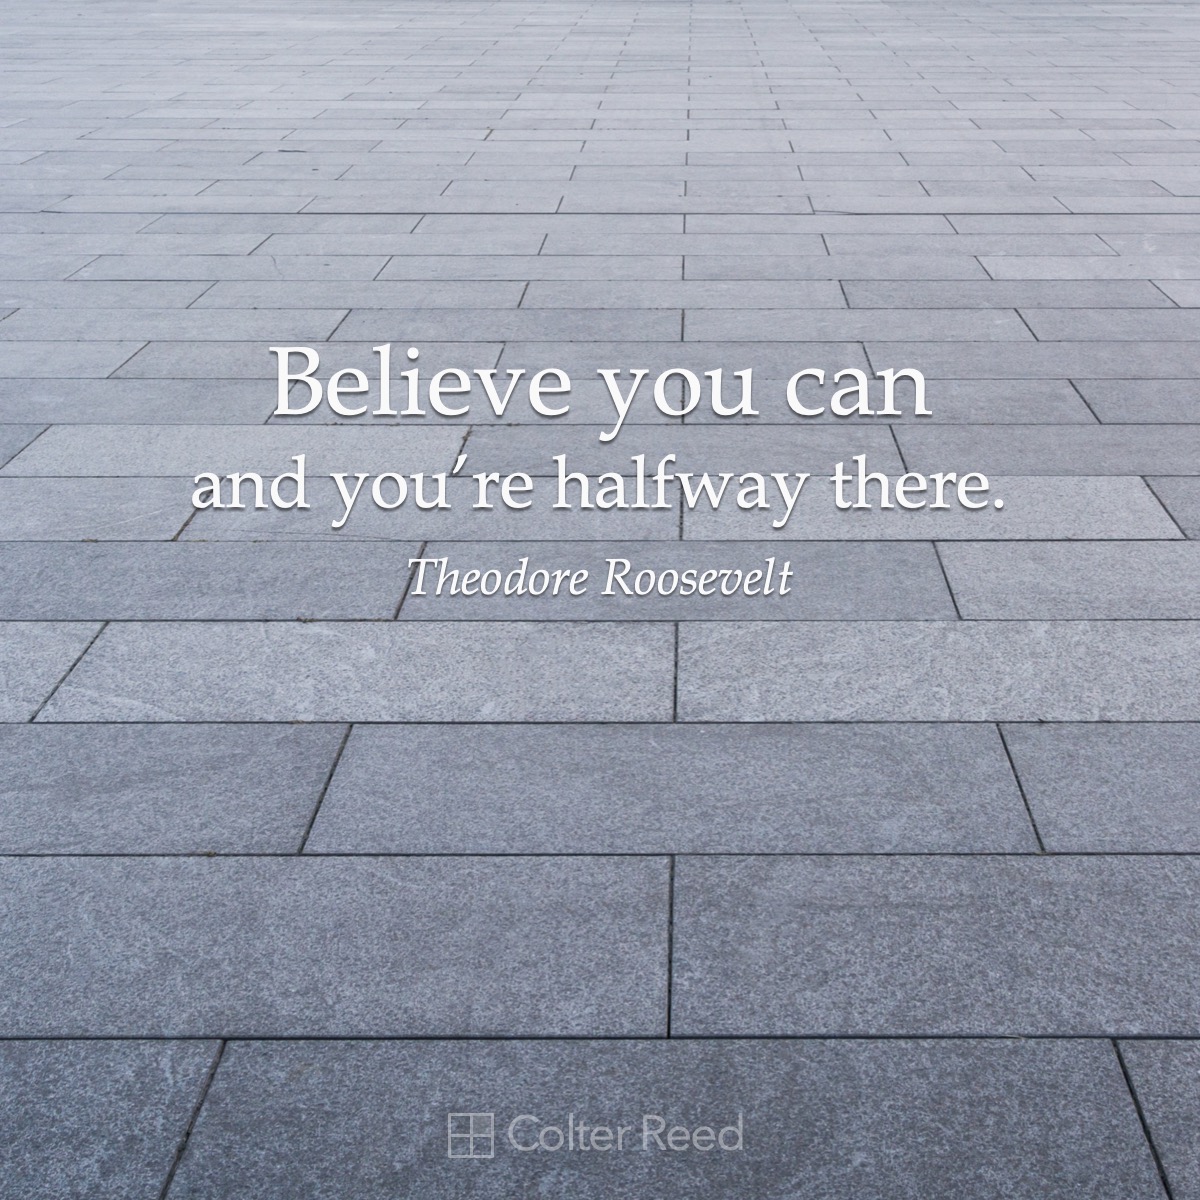 Believe you can and you’re halfway there. —Theodore Roosevelt